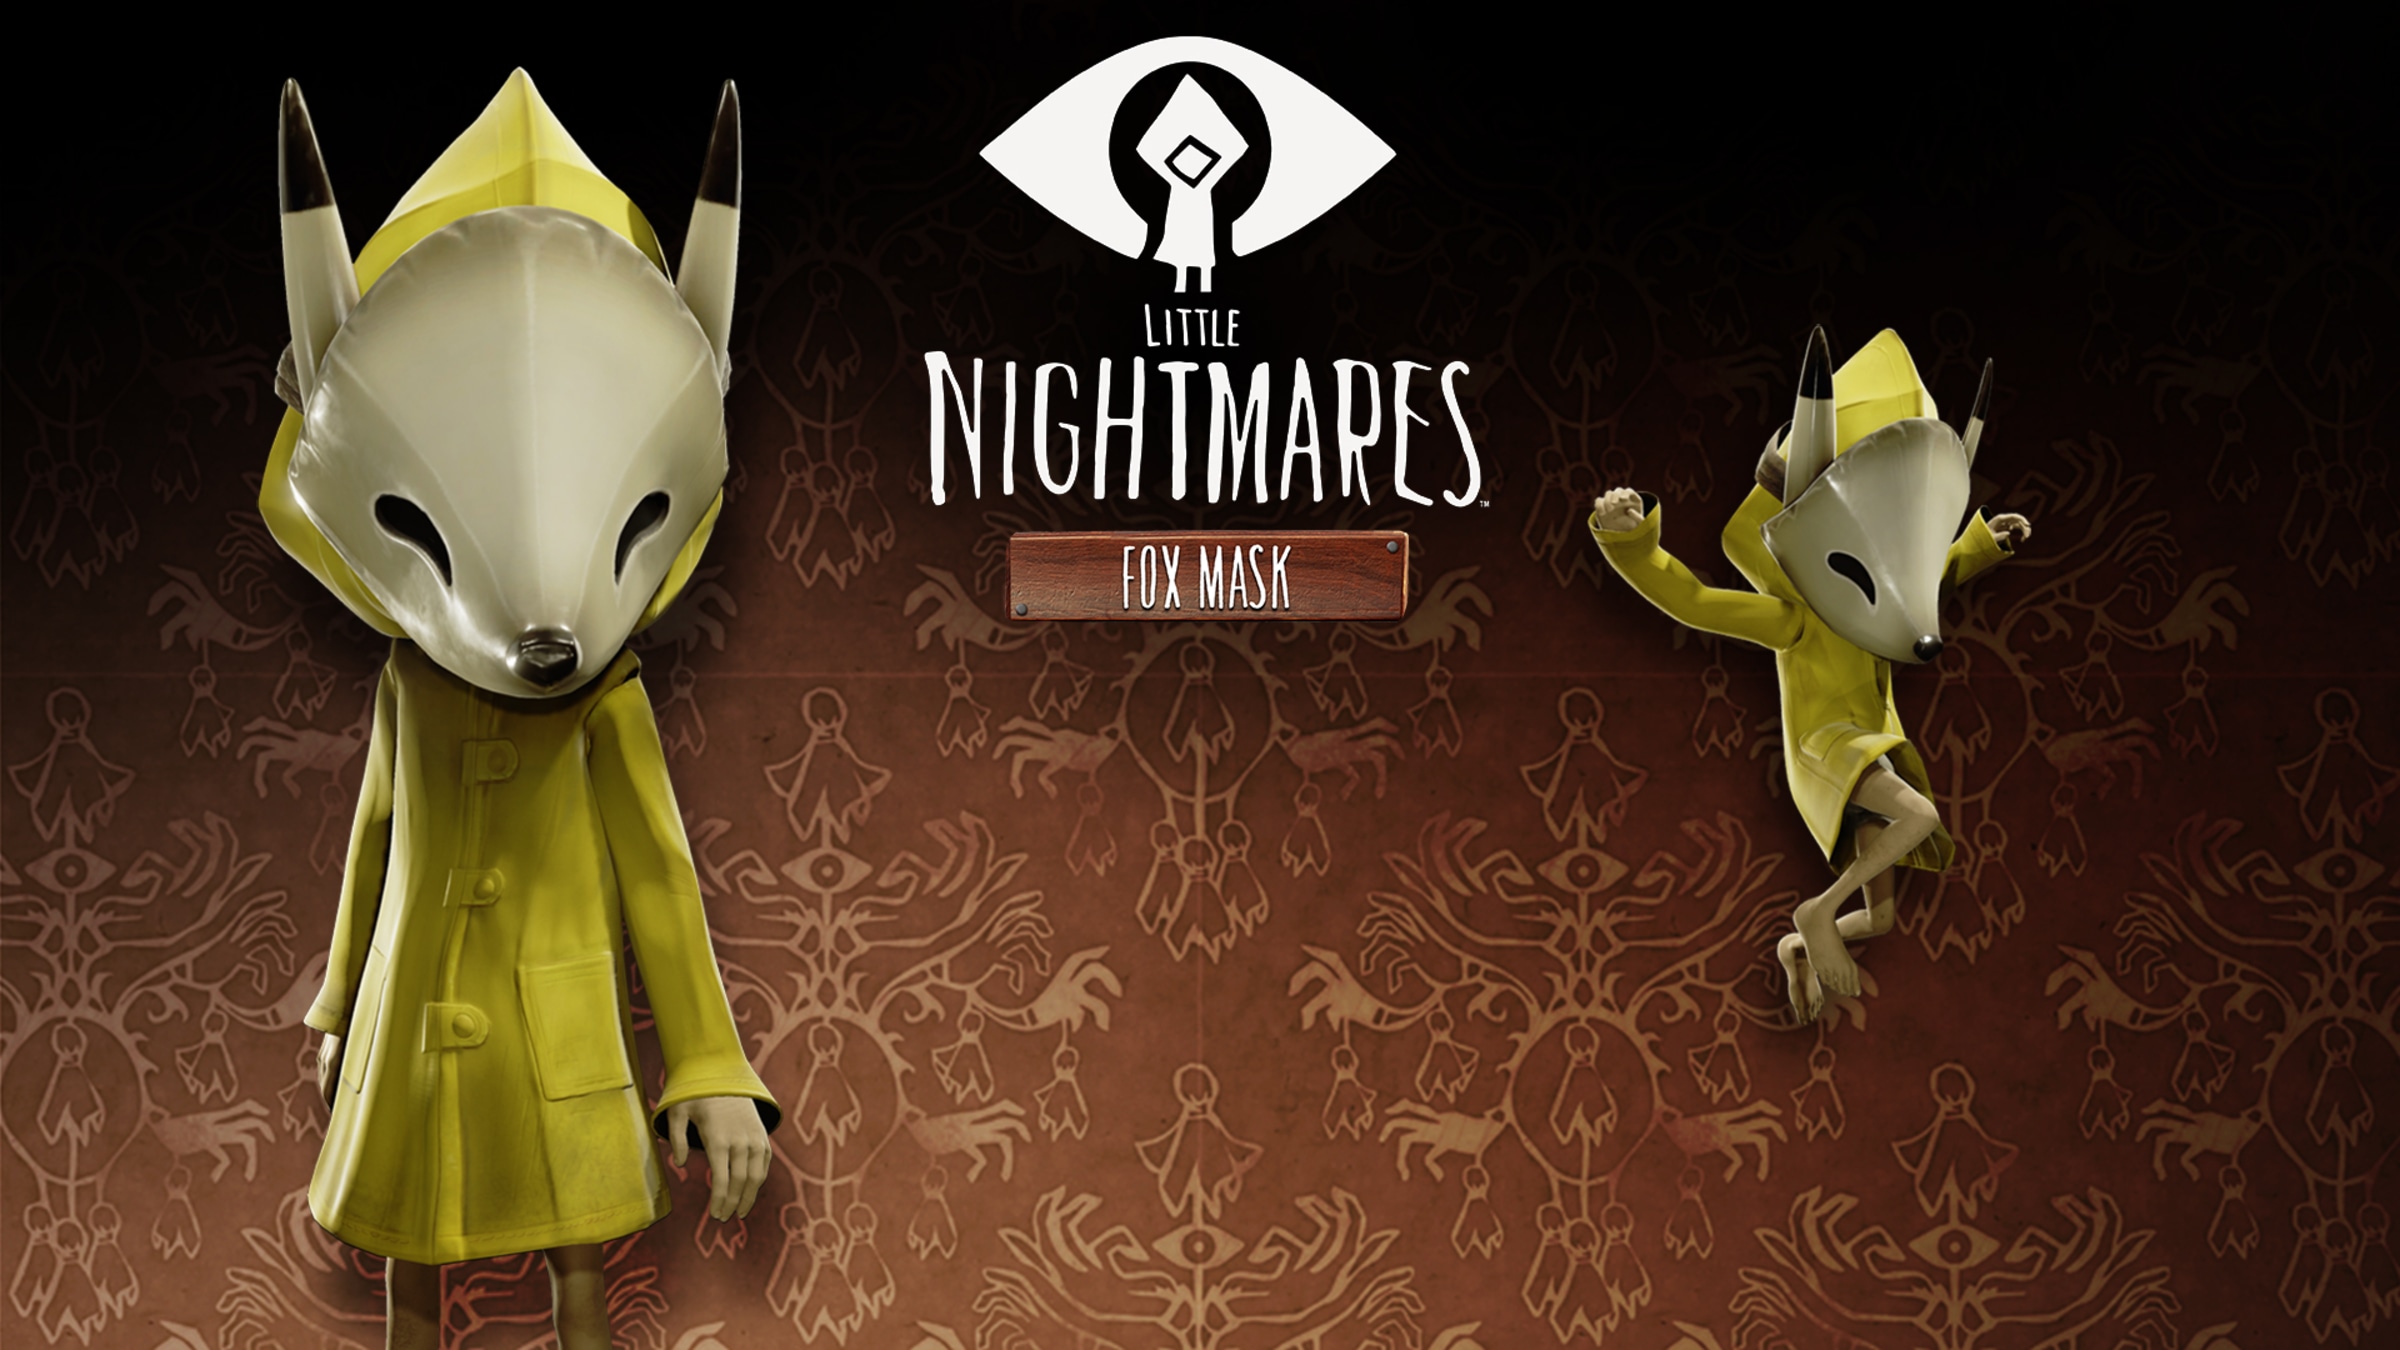 Little Nightmares - Fox Mask for Nintendo Switch - Nintendo Official Site